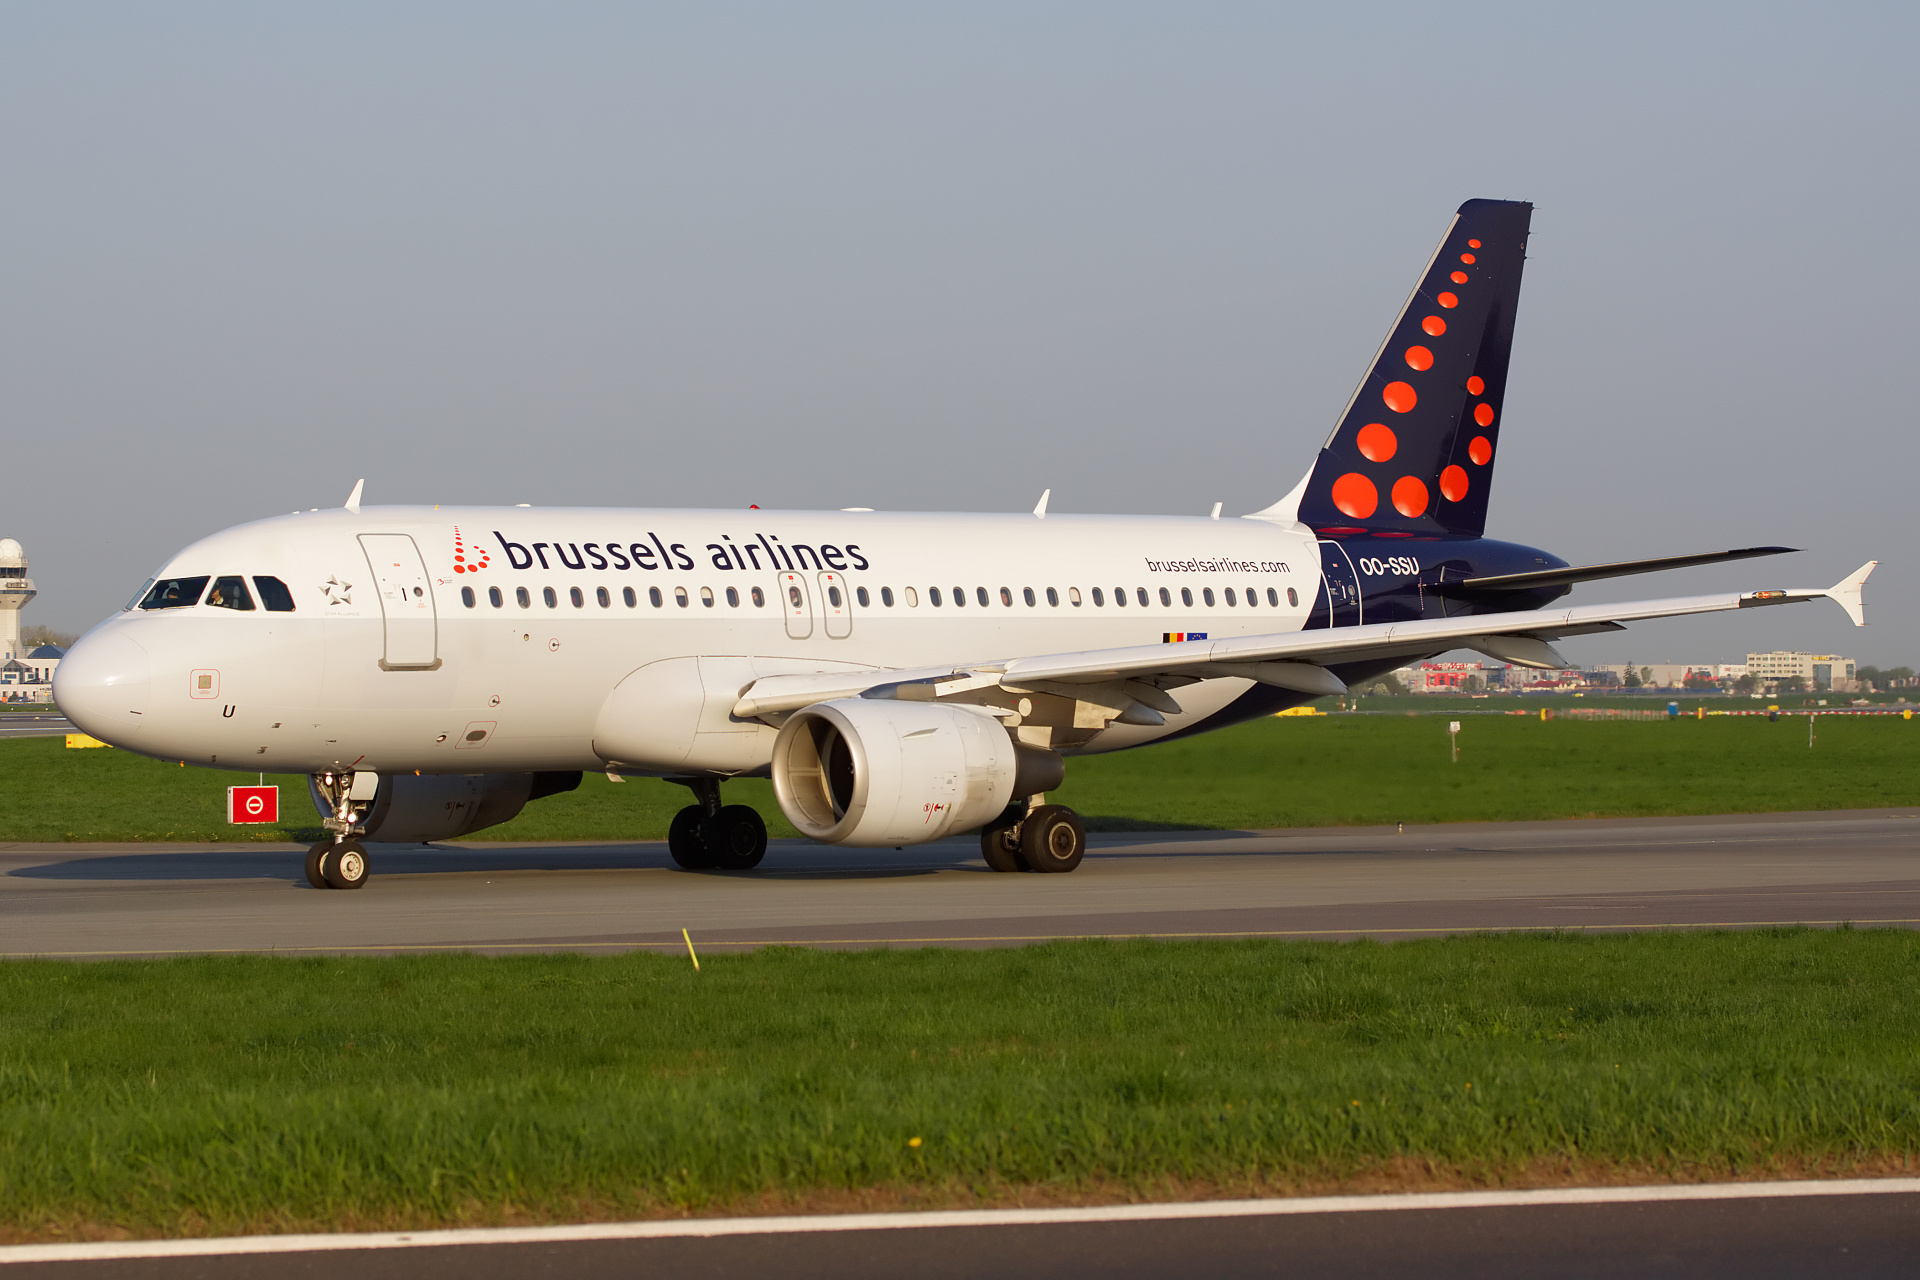 OO-SSU (Aircraft » EPWA Spotting » Airbus A319-100 » Brussels Airlines)